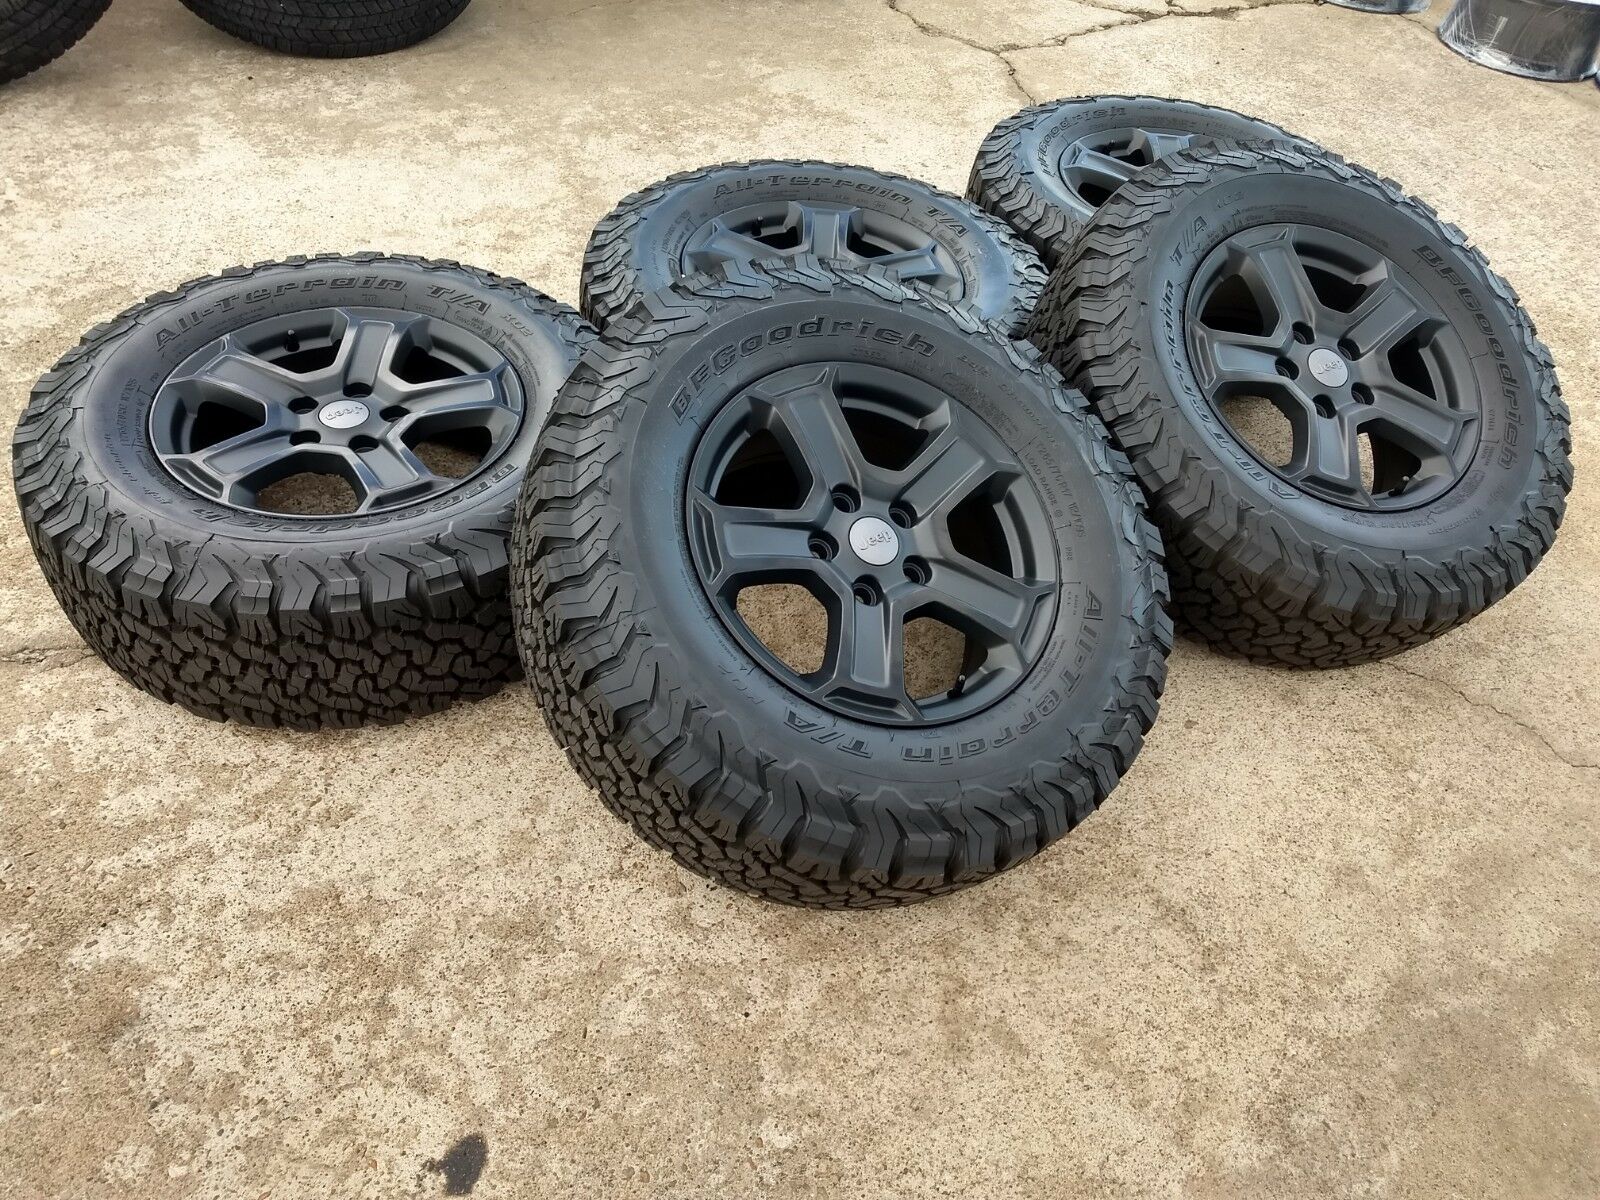 17" Jeep Wrangler Rubicon OEM 2021 Black wheels and tires